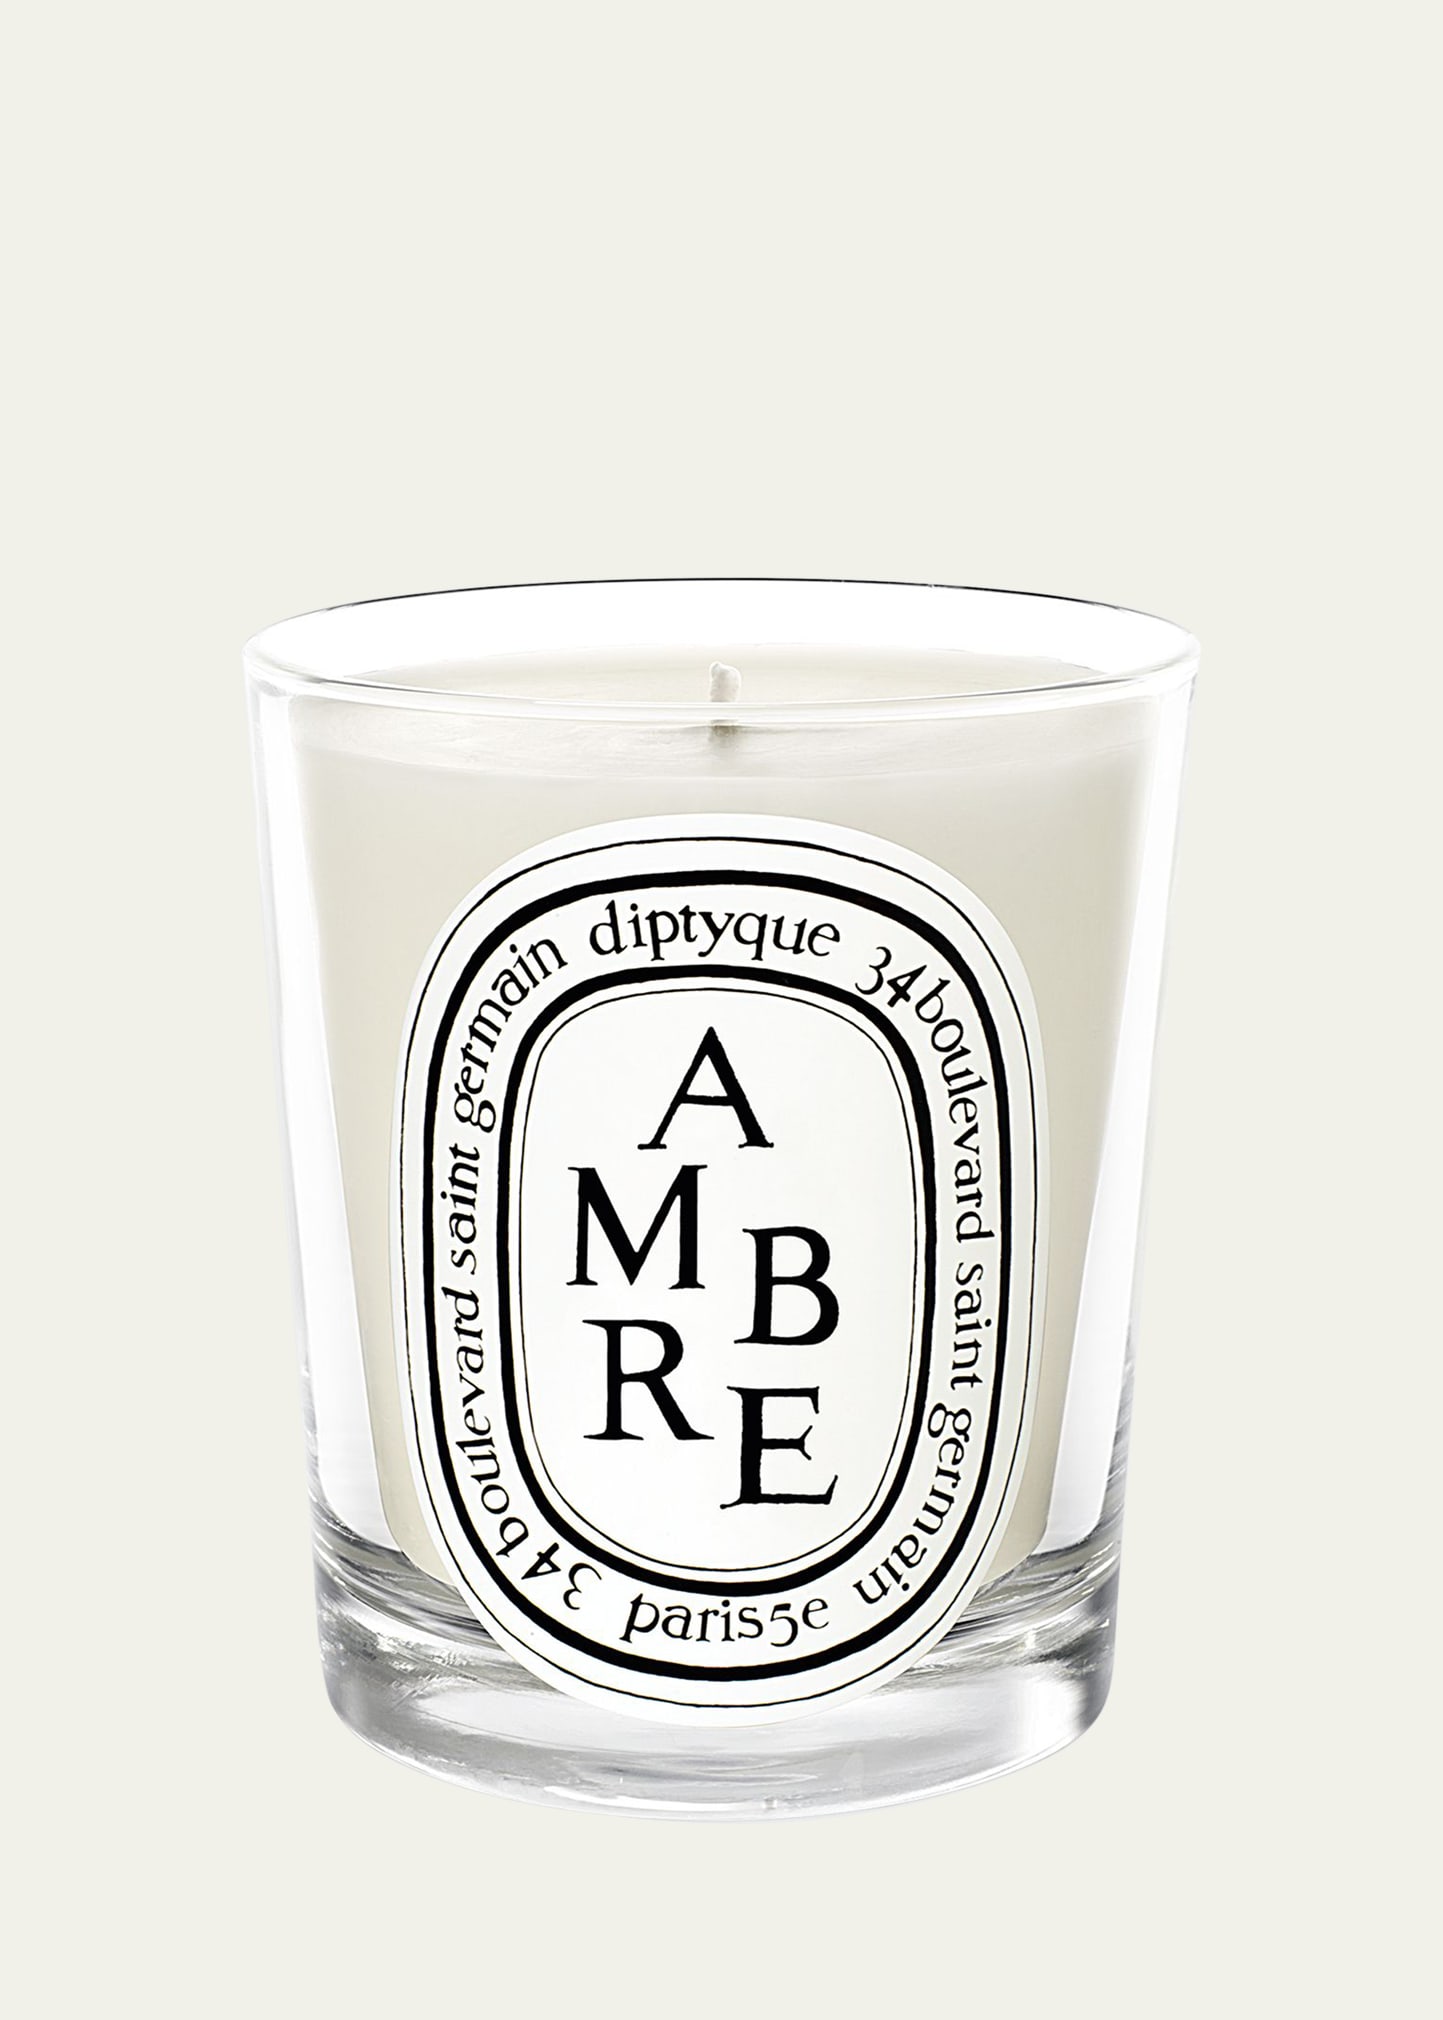 DIPTYQUE Ambre (Amber) Scented Candle, 6.5 oz.